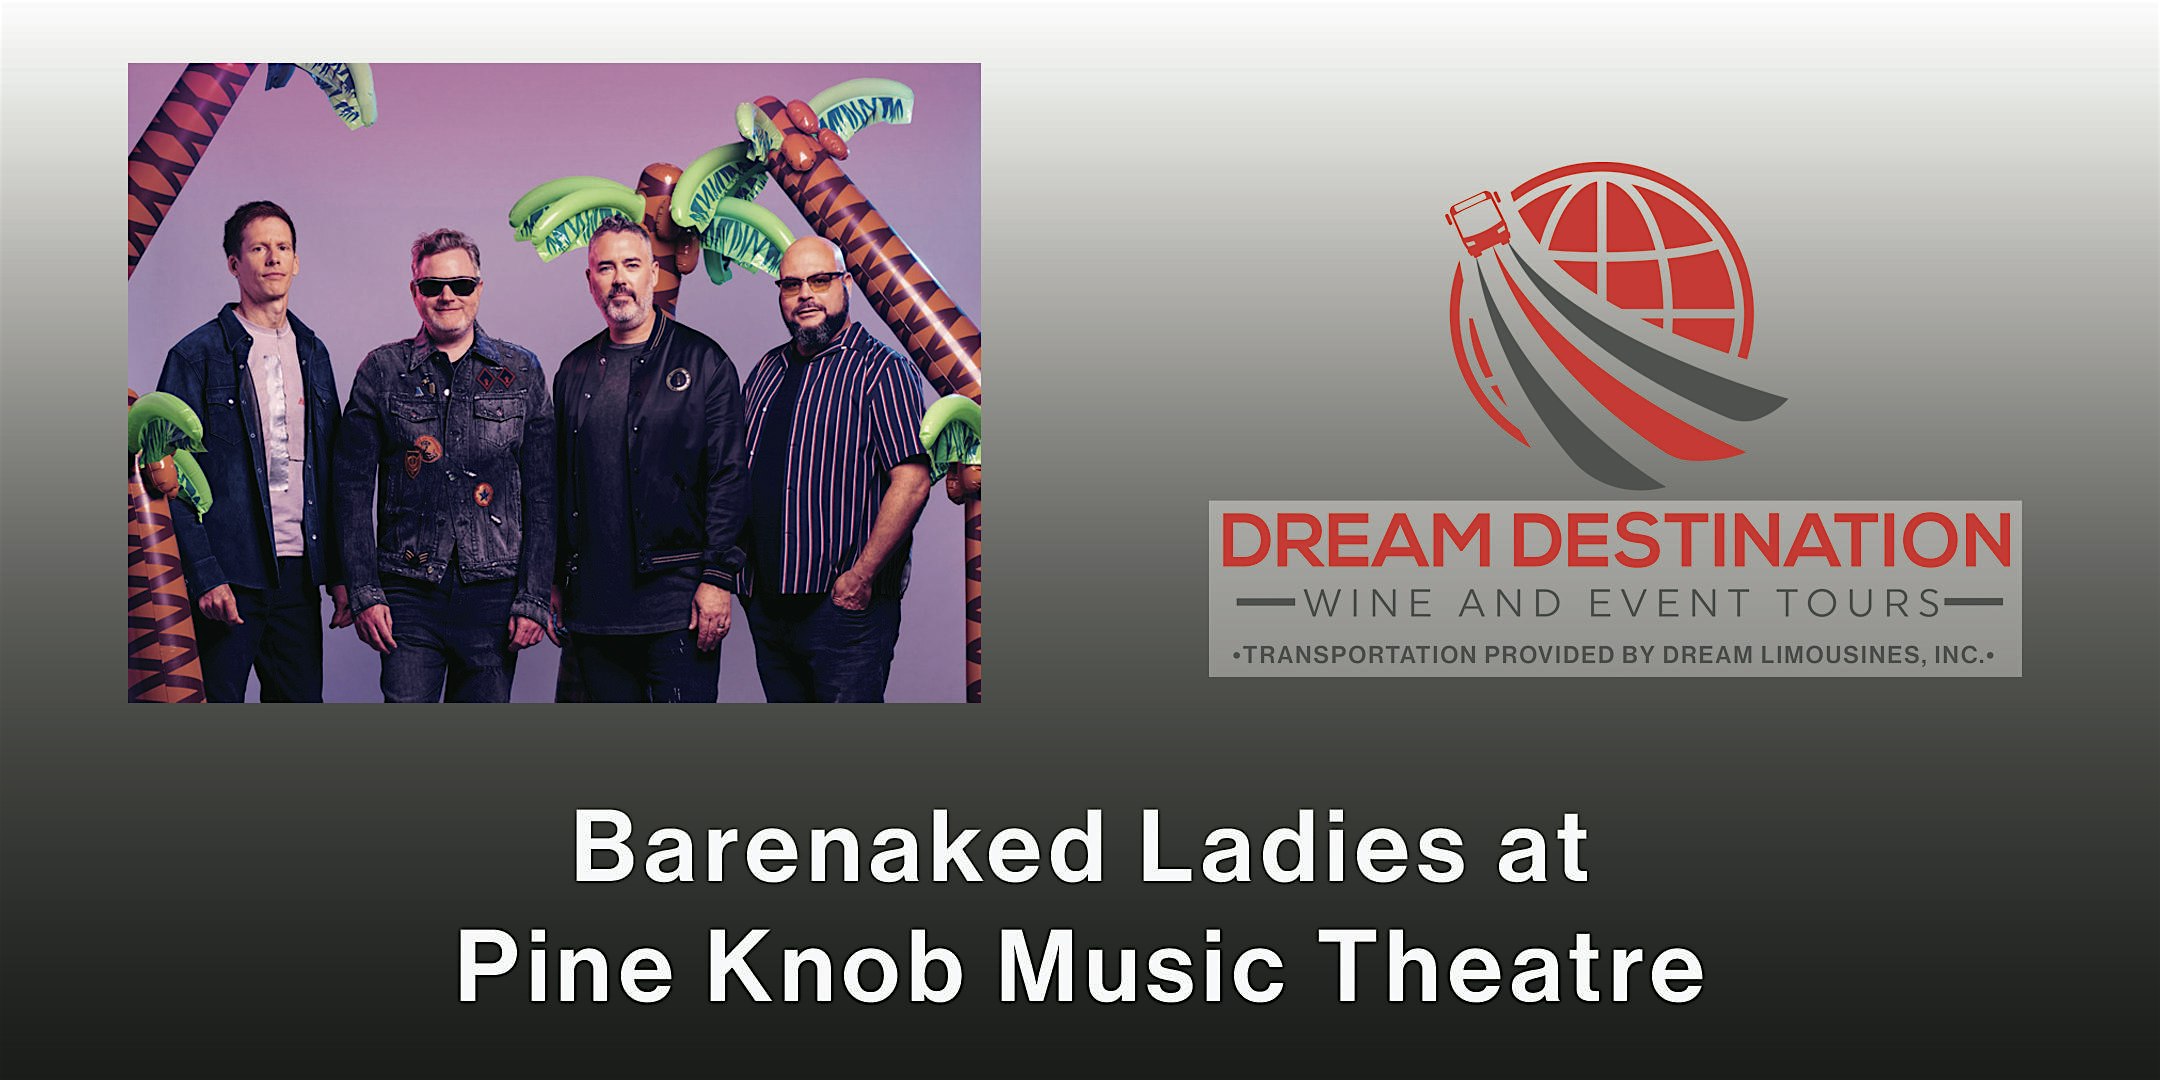 Shuttle Bus to See Barenaked Ladies at Pine Knob Music Theatre